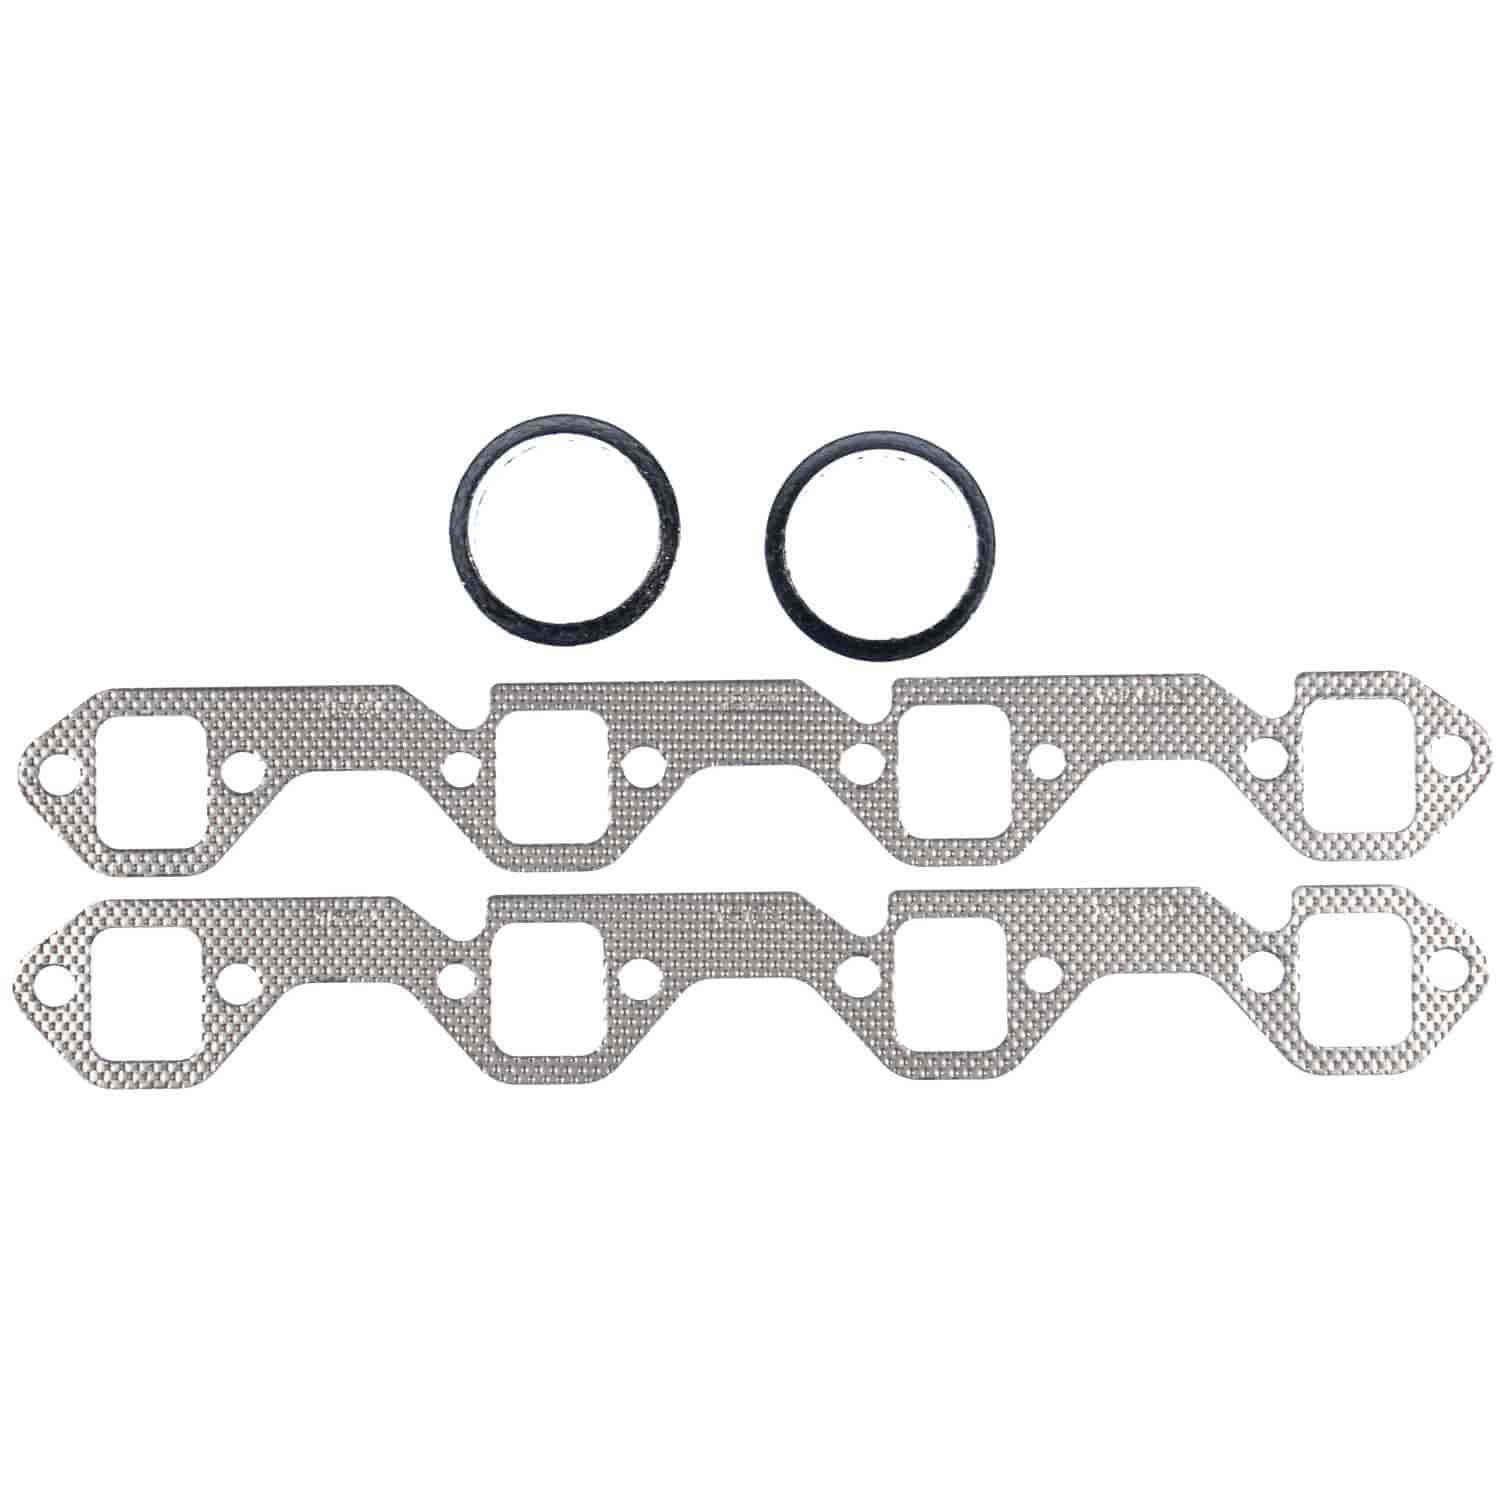 Exhaust Manifold Gasket Set 1962-1982 Small Block Ford V8 221/255/260/289/302 (3.6/4.2/4.3/4.7/5.0L)